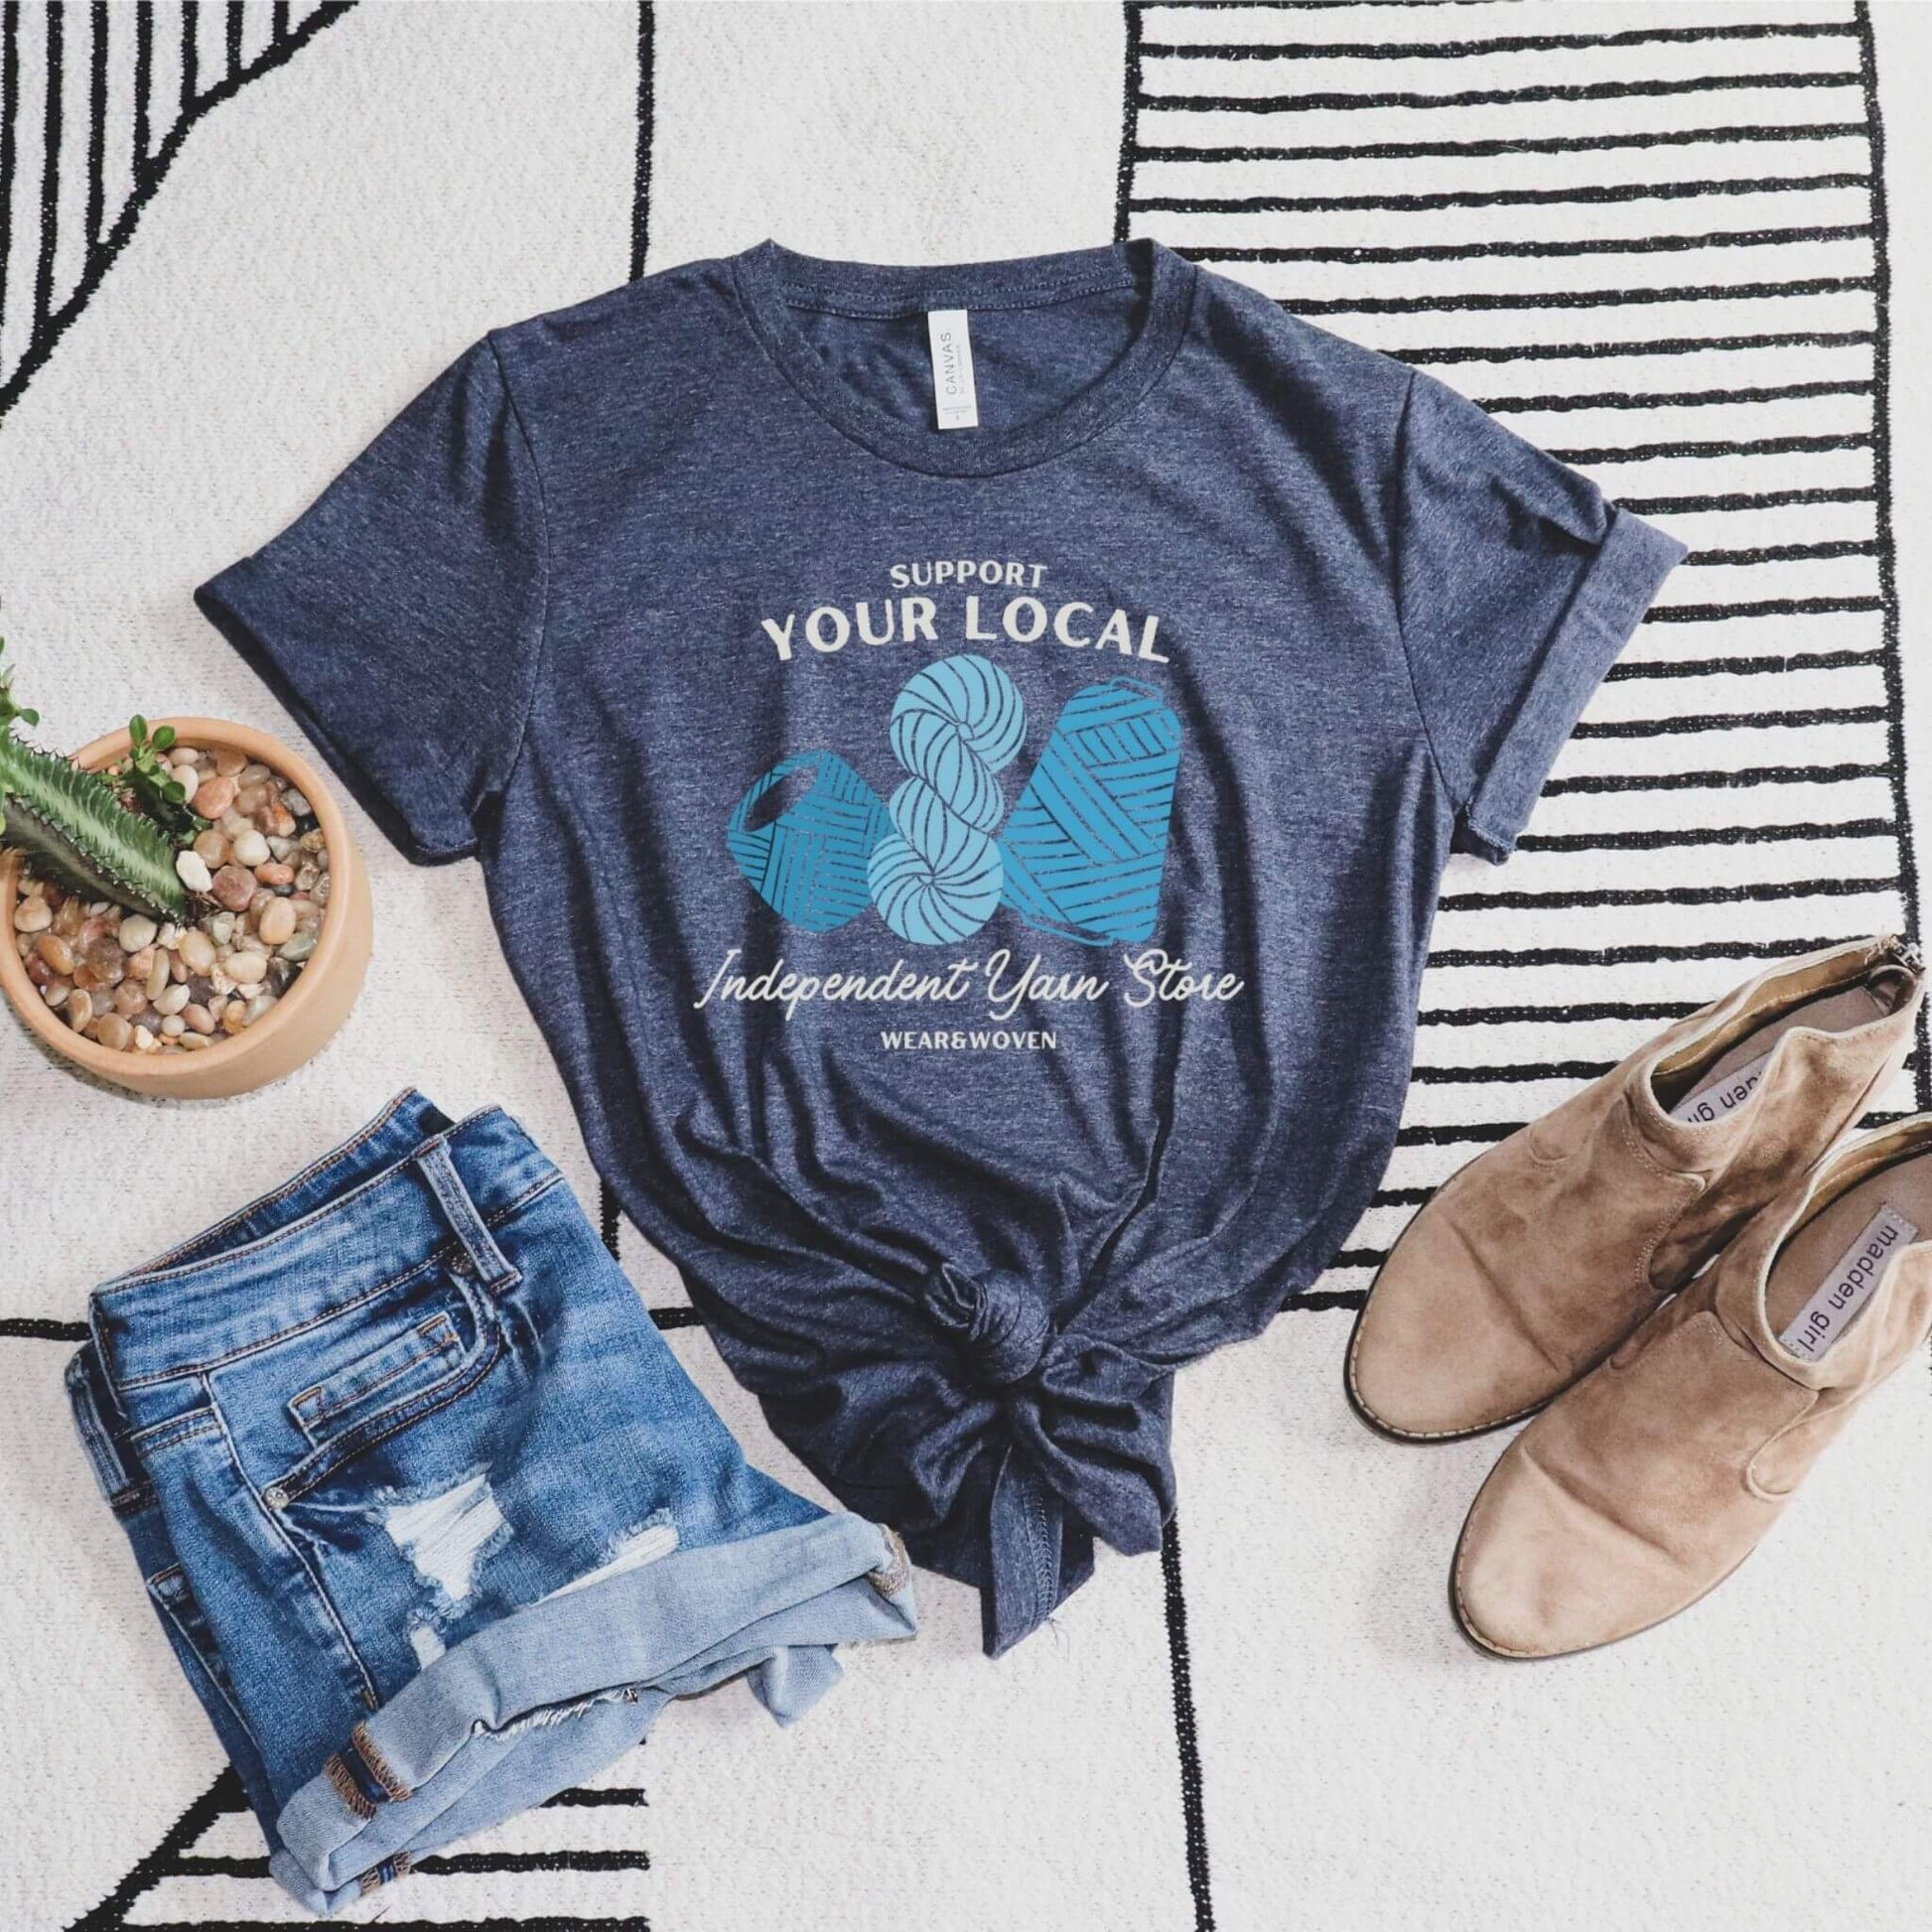 support your local independent yarn store dark heather blue t-shirt. shirt has three images of yarn in different shades of blue